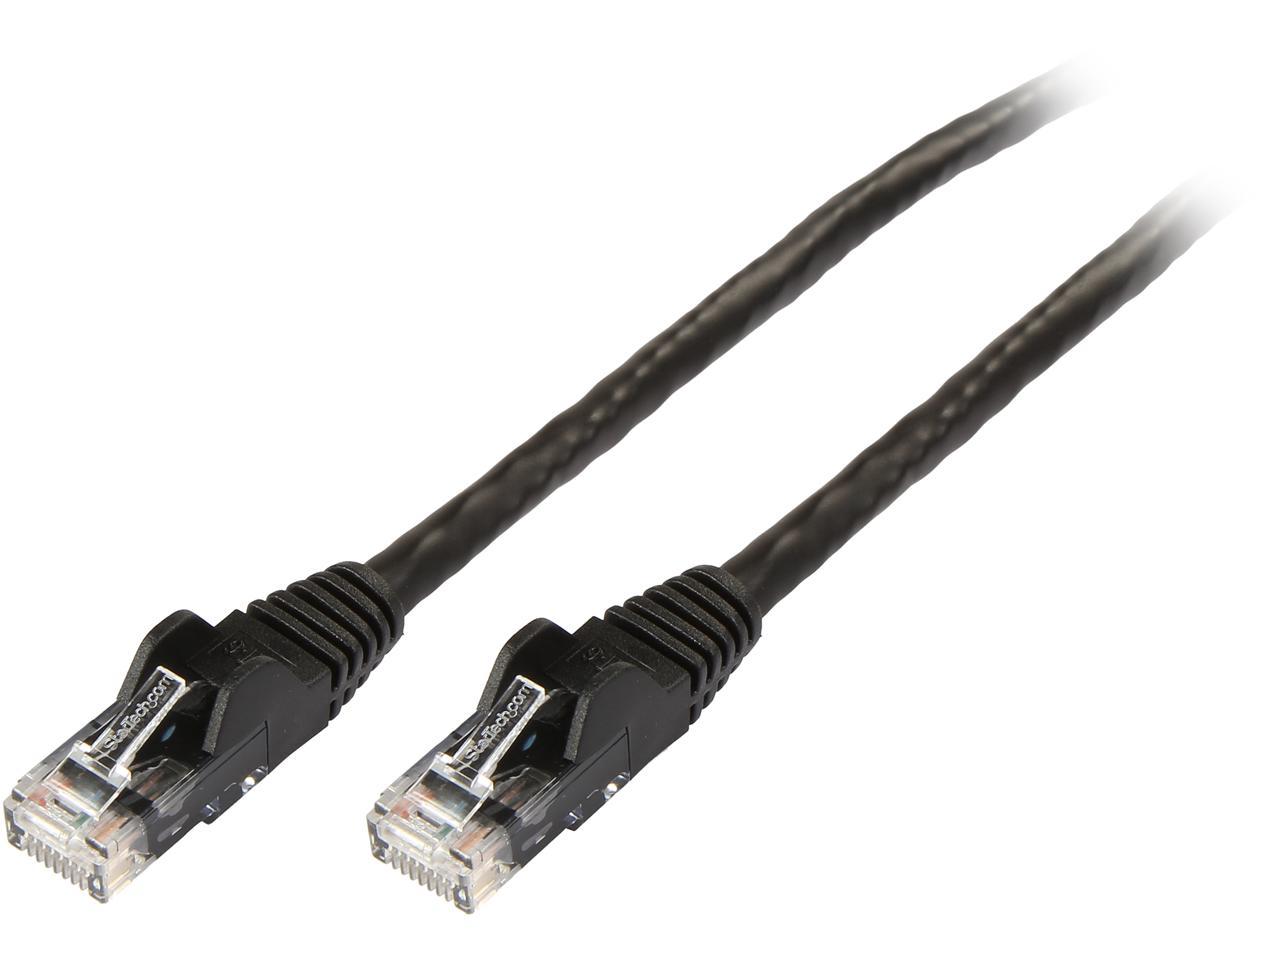 Patch 40 Feet LAN Internet Cable Cat6 Ethernet Cable 40 ft 2 Pack RJ45 utp Cat 6 Network Cord Black 